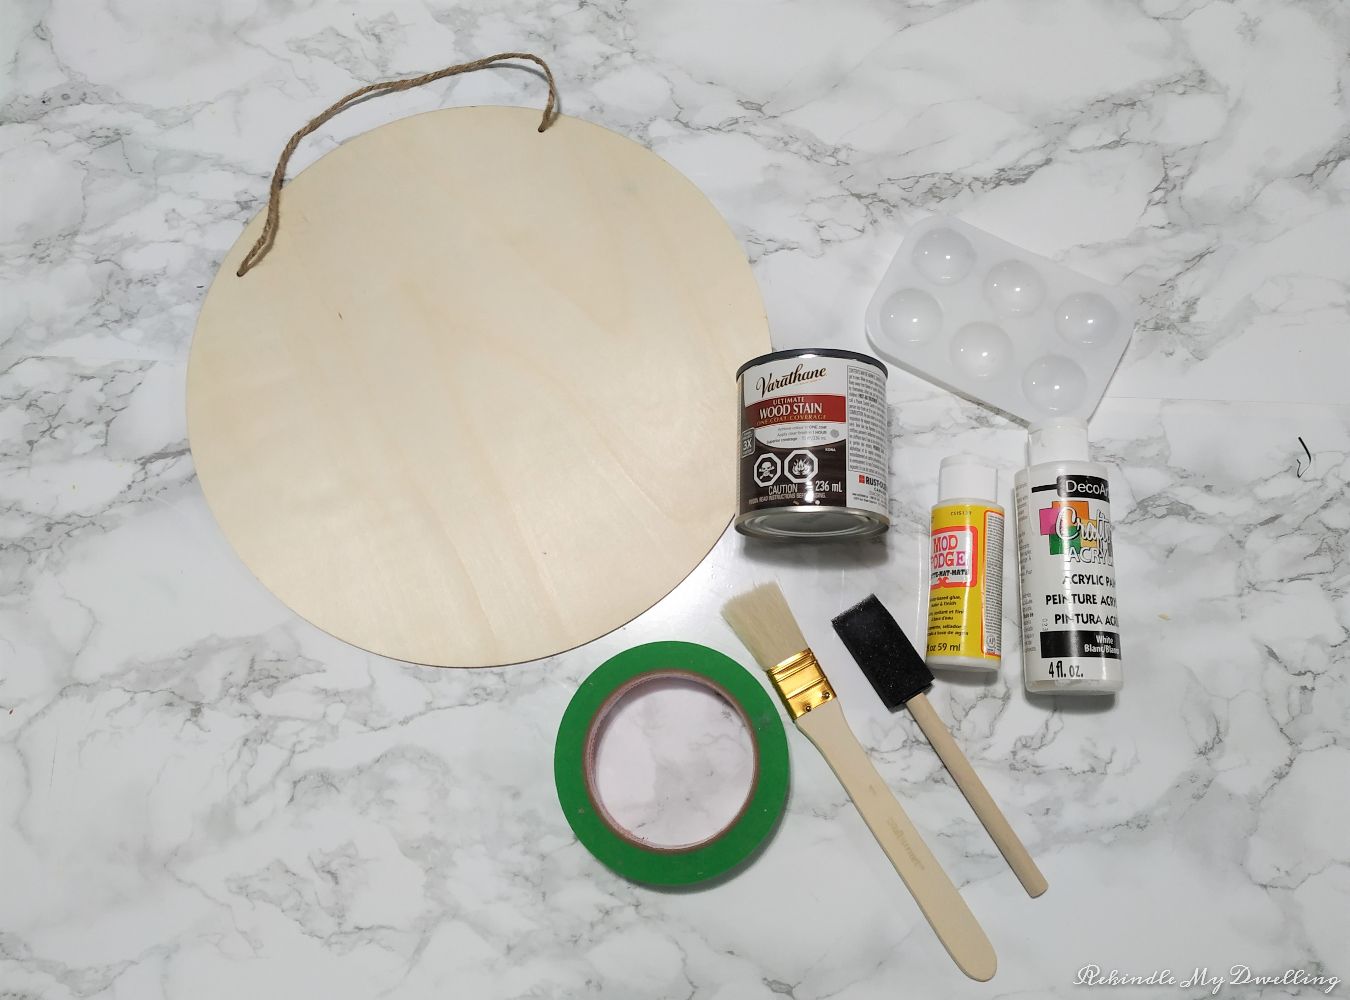 Materials needed to make a diy wood sign including a wood circle, paint, paint brushes, and tape.